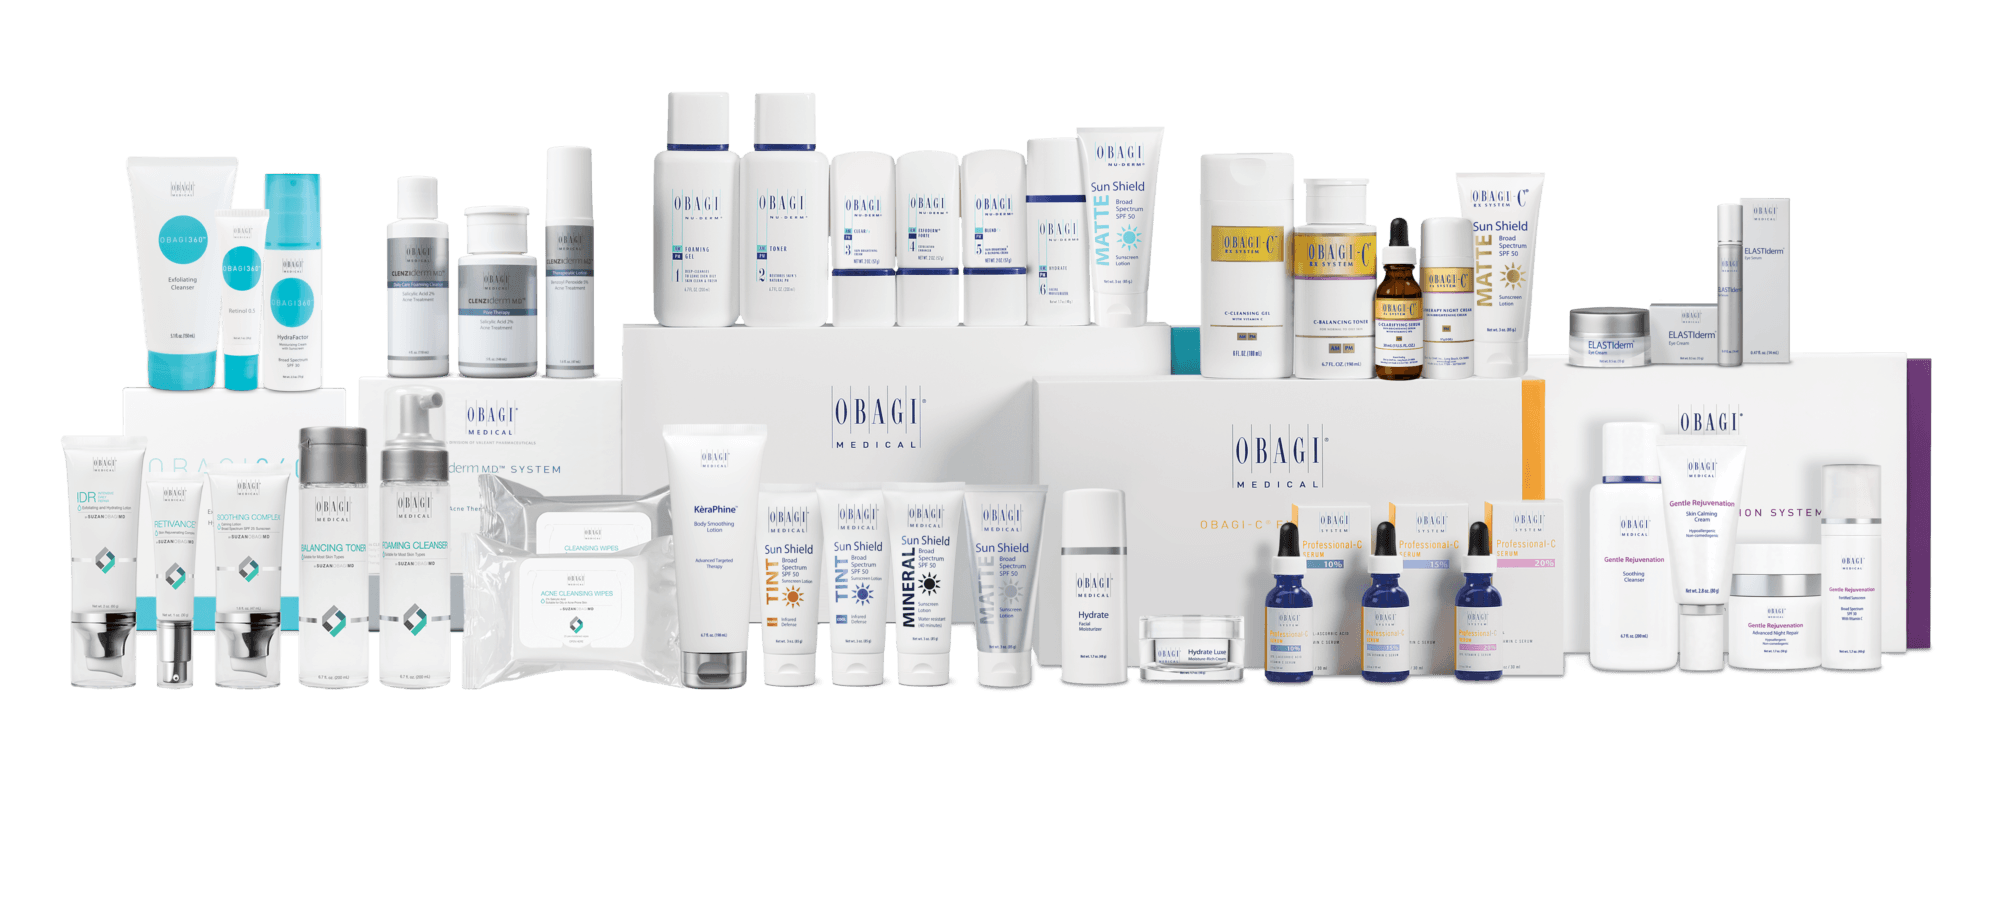 The OBAGI product line